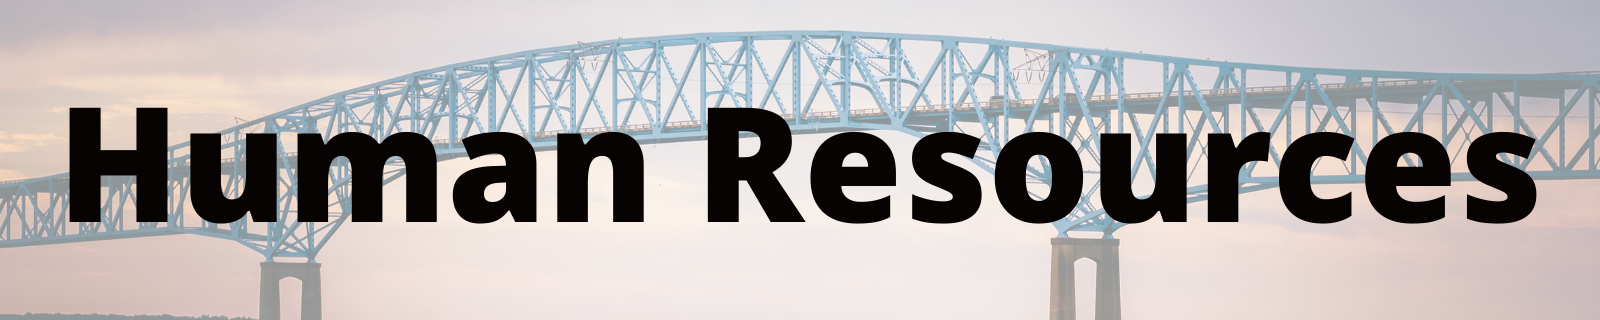 header that reads "human resources"